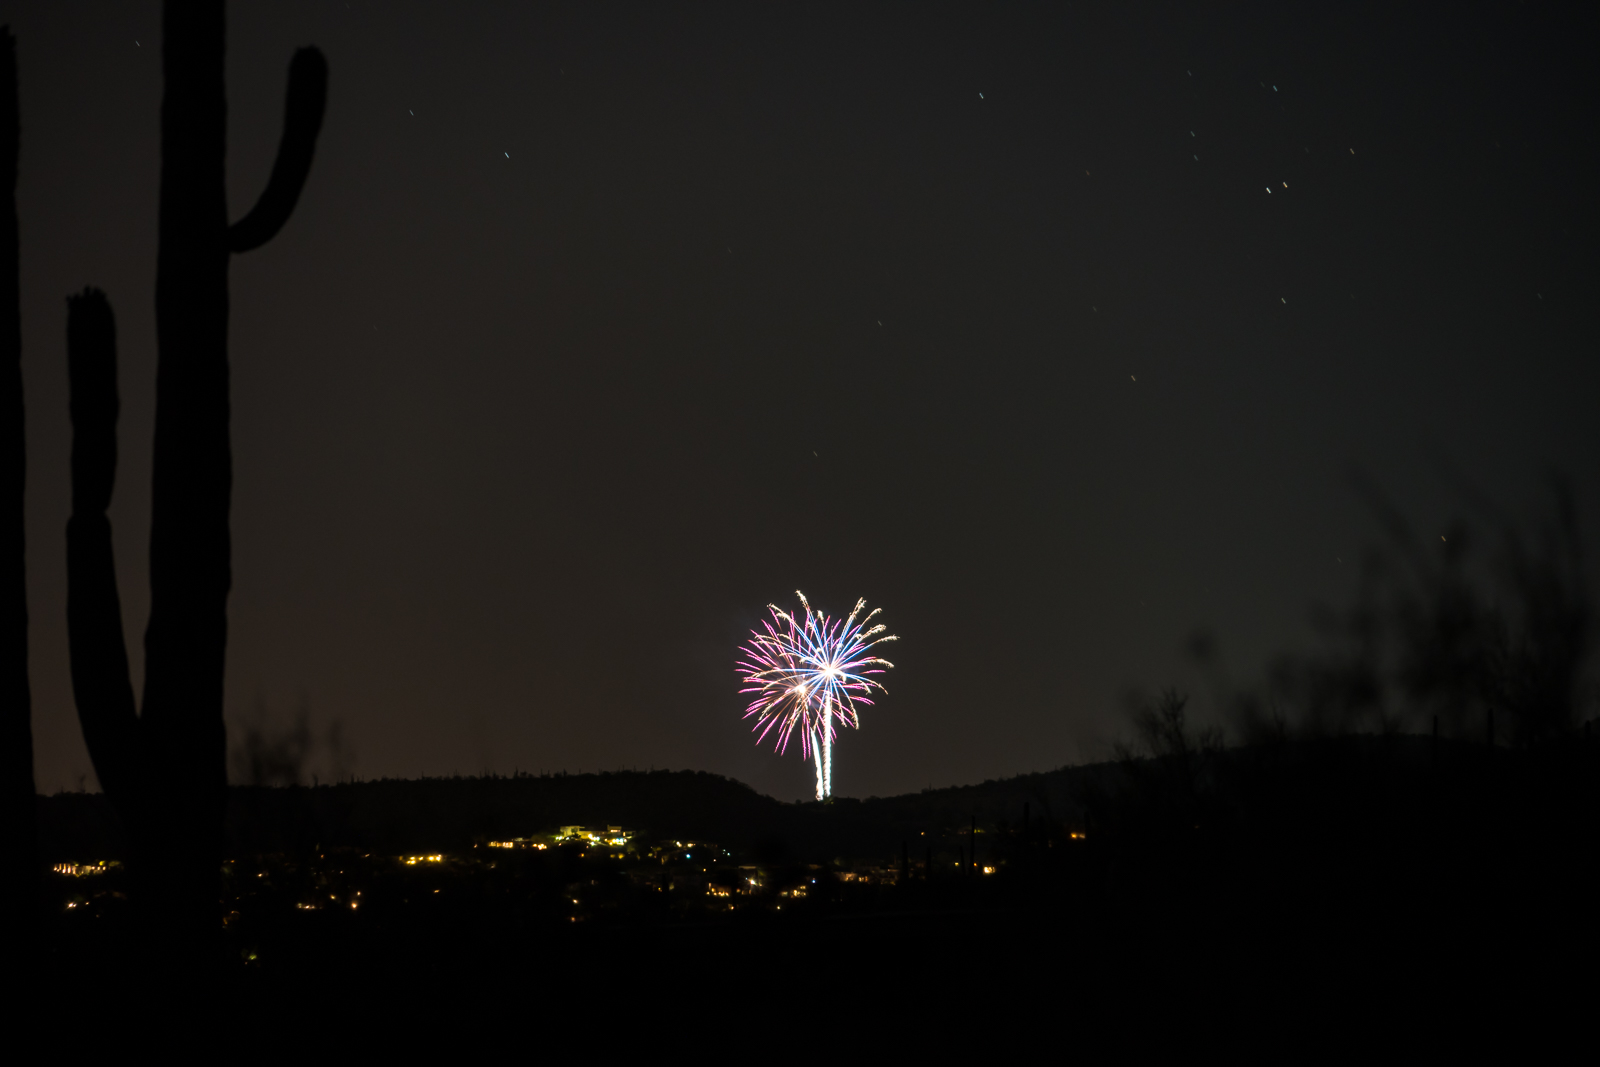 Unexpected April fireworks - taken from the Sabino Canyon Recreation Area. April 2016.